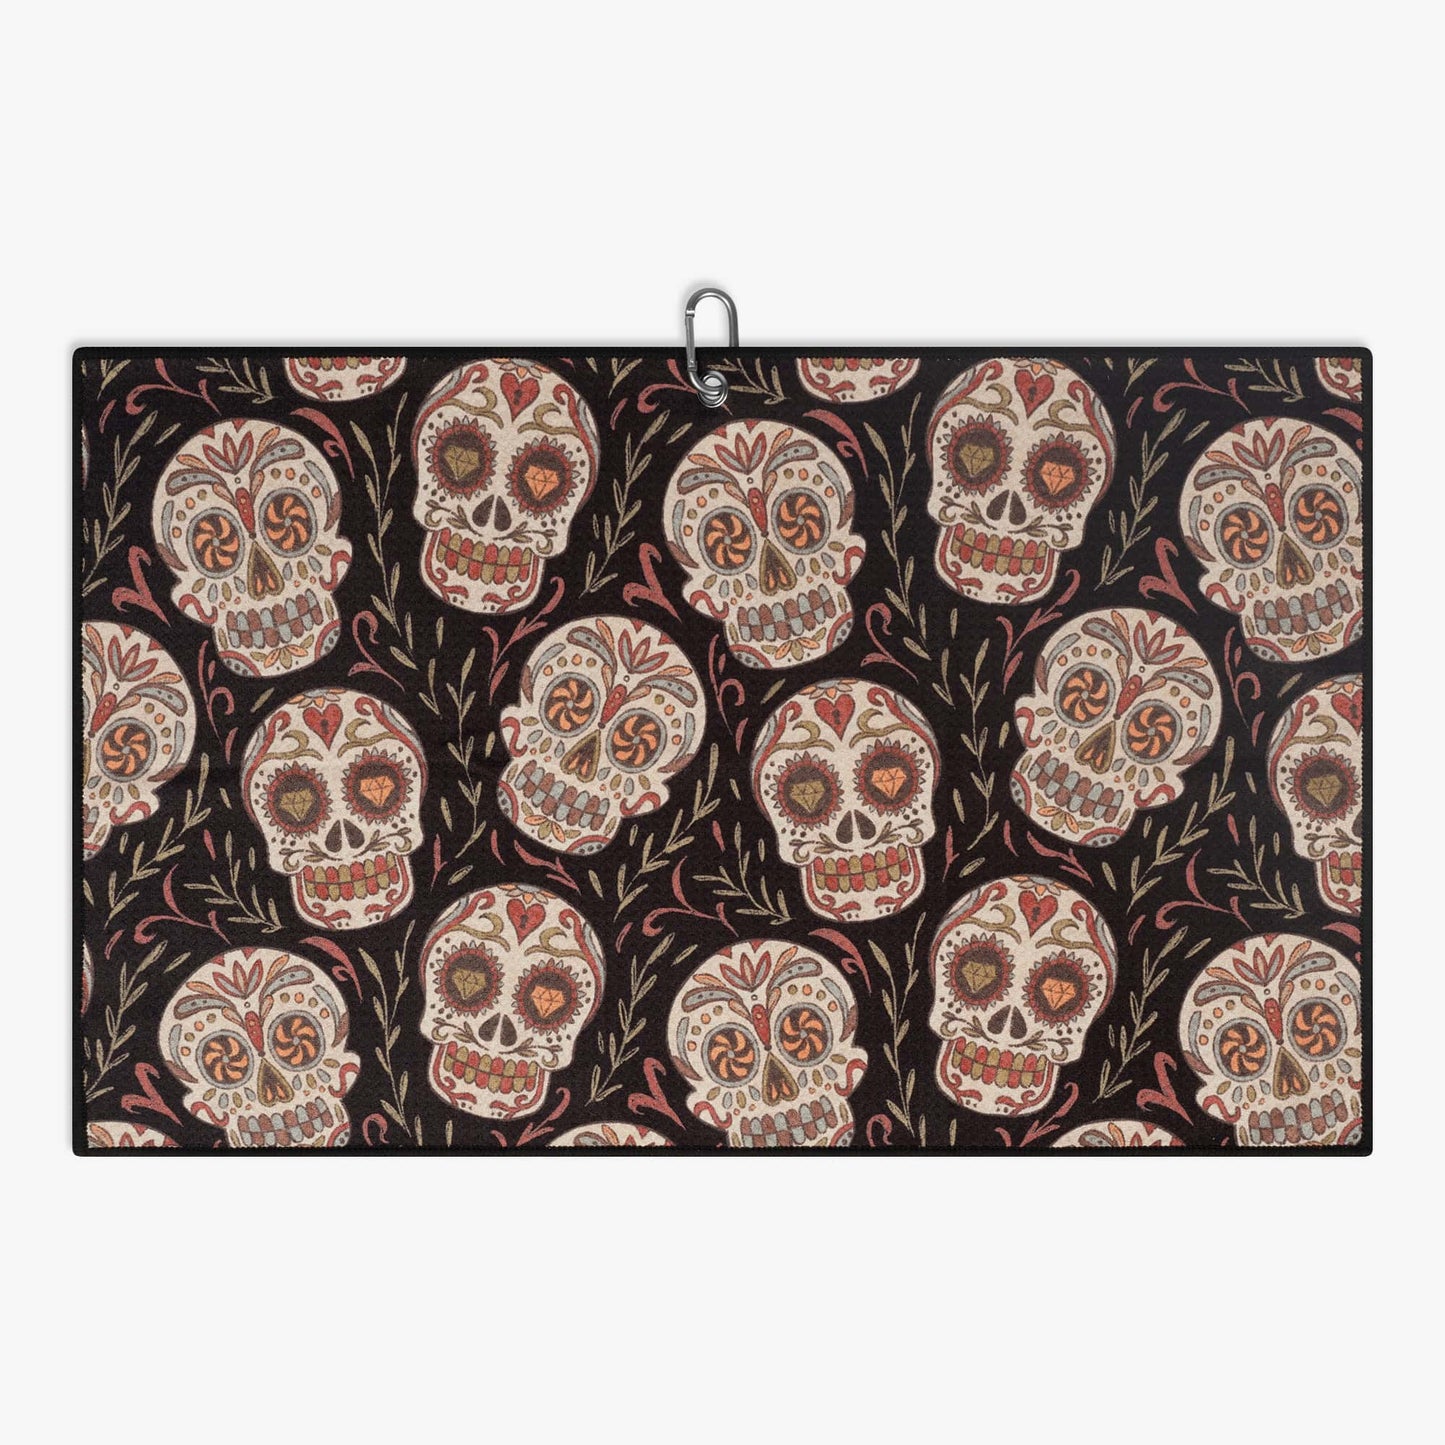 Golf towel with skull designs